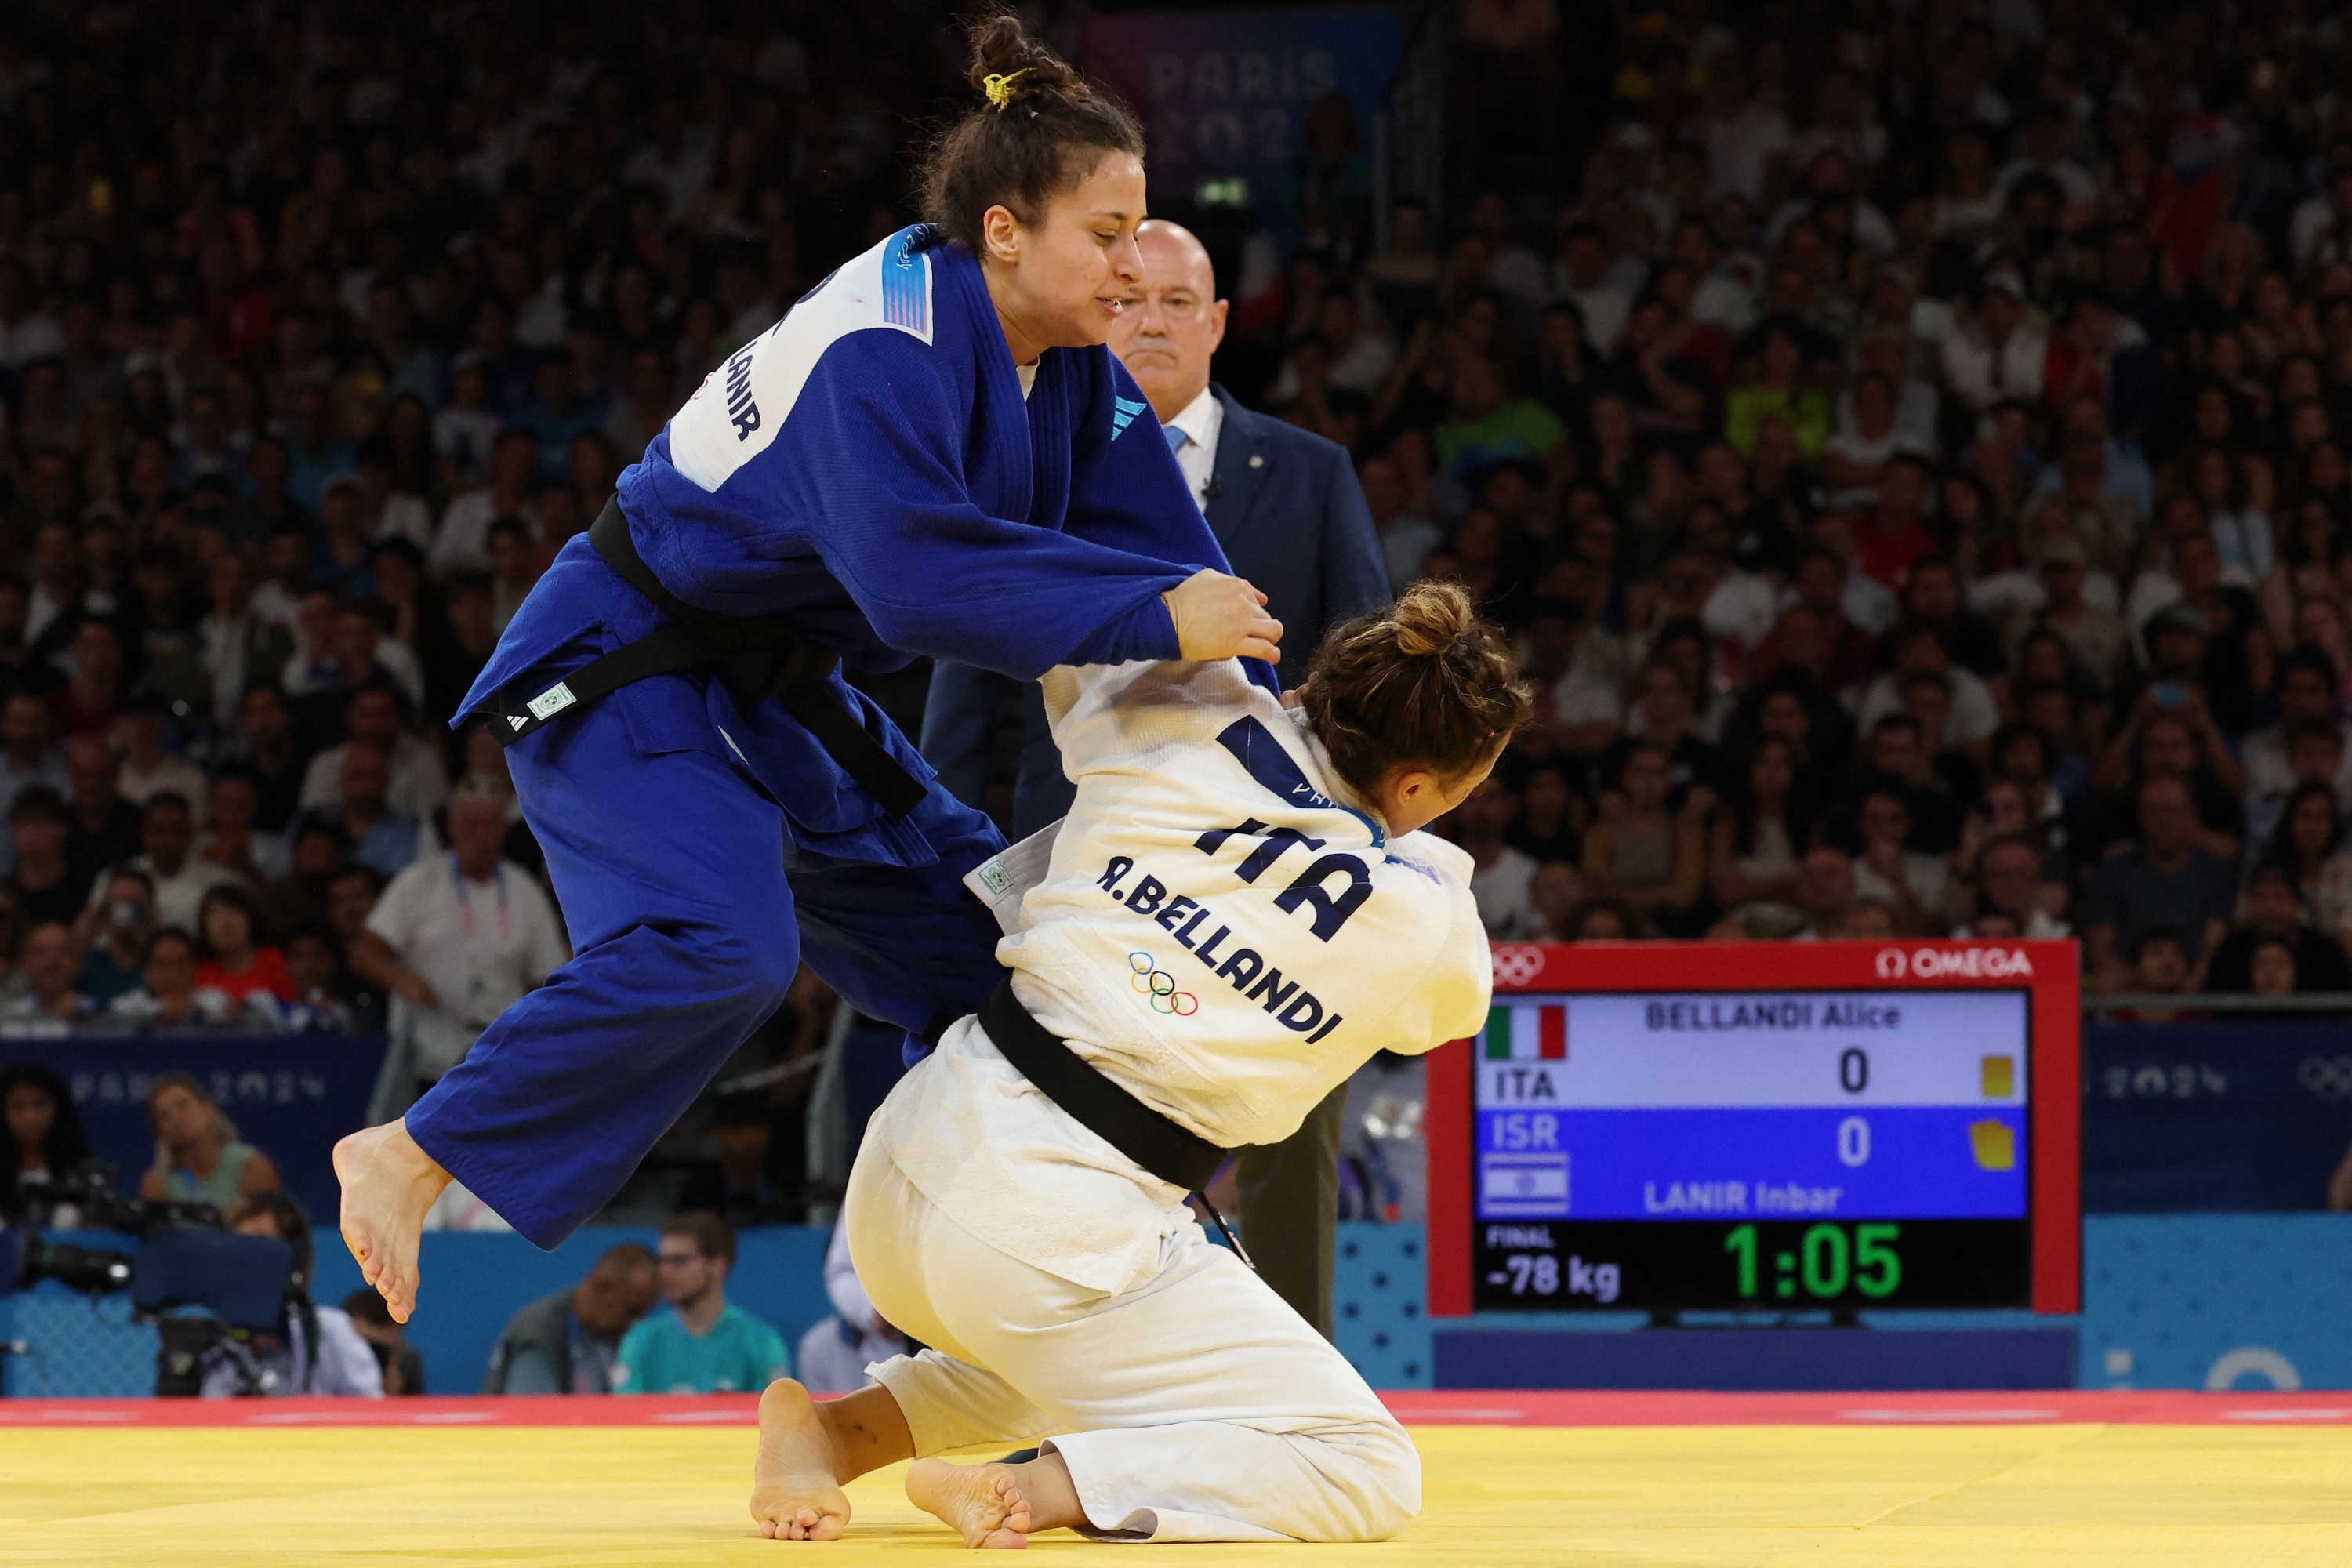 Italy's Alice Bellandi and Israel's Inbar Lanir (Blue) compete in the judo women's -78kg gold medal bout of the Paris 2024 Olympic Games at the Champ-de-Mars Arena, in Paris on August 1, 2024. (Photo by Jack GUEZ / AFP)